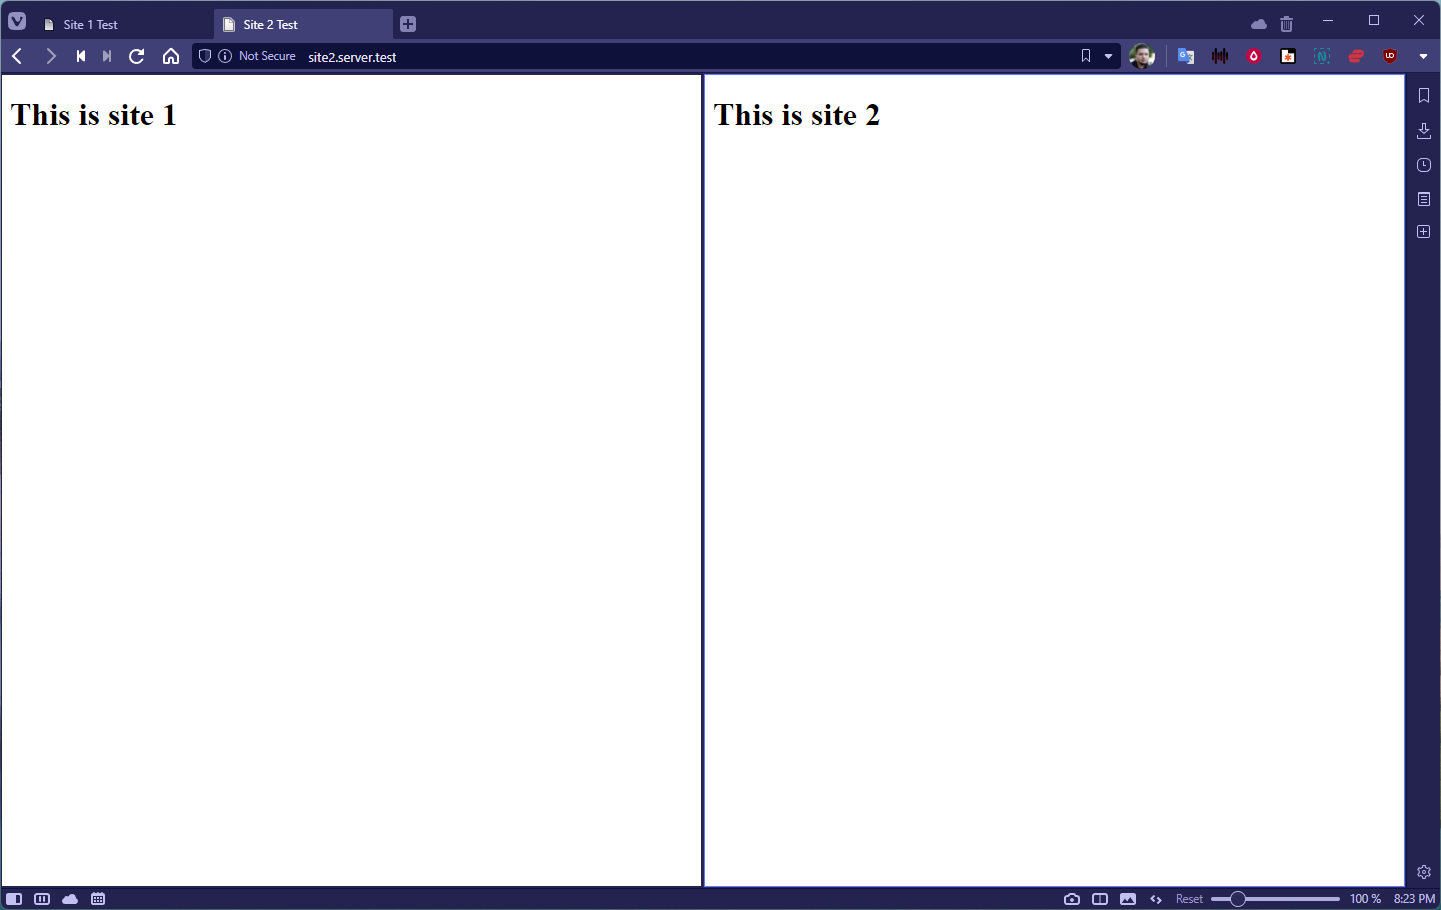 A screenshot of the two test websites side by side